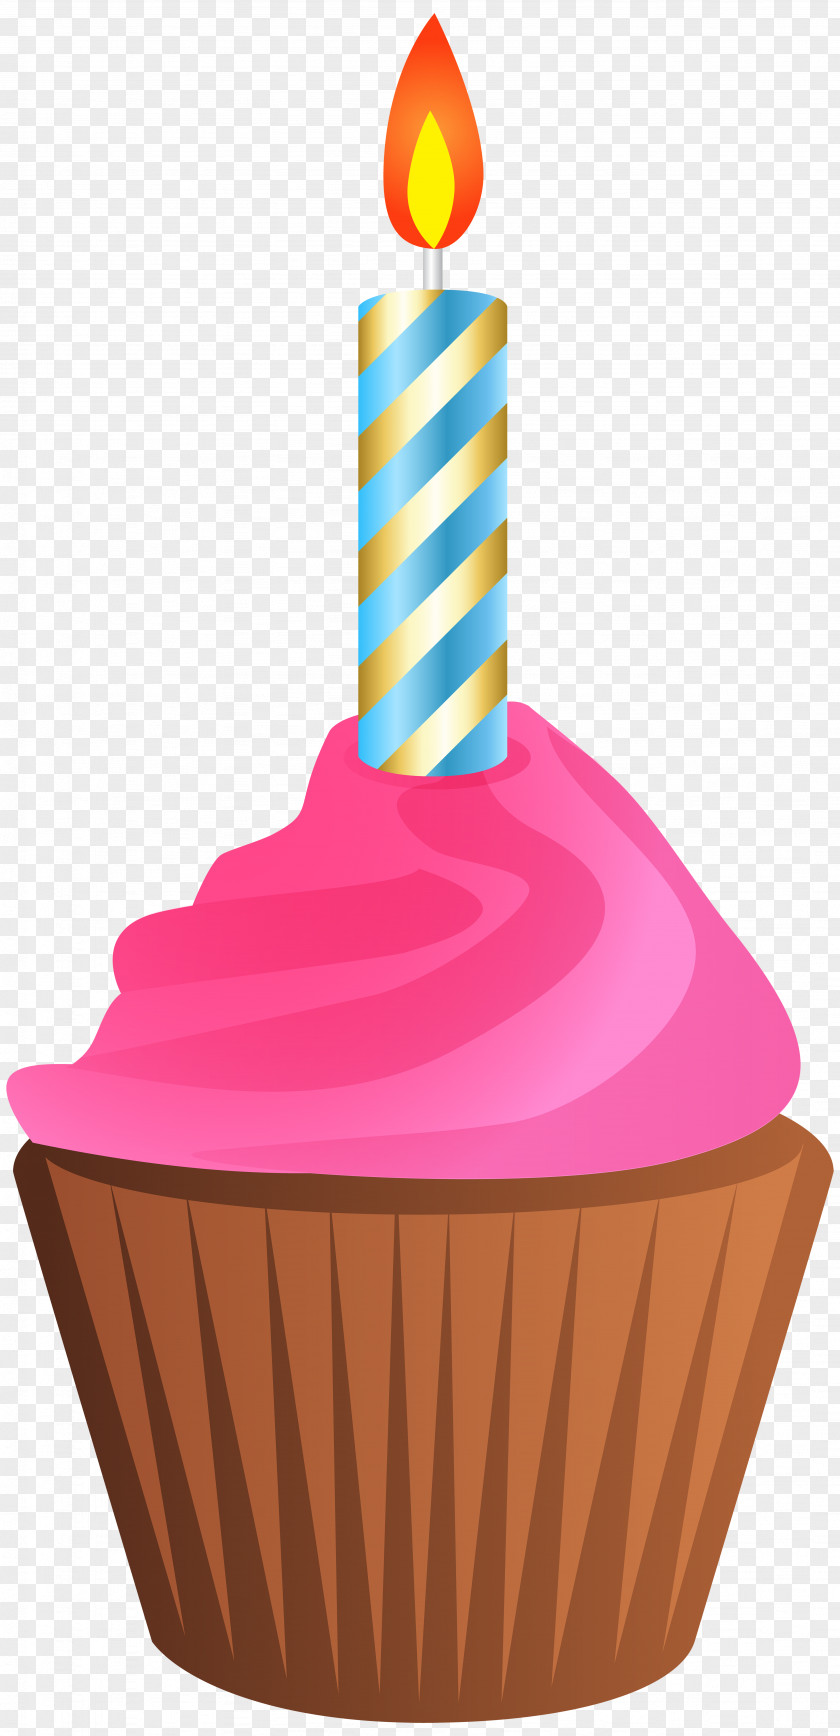 Birthday Muffin With Candle Transparent Clip Art Image Cake Cupcake PNG